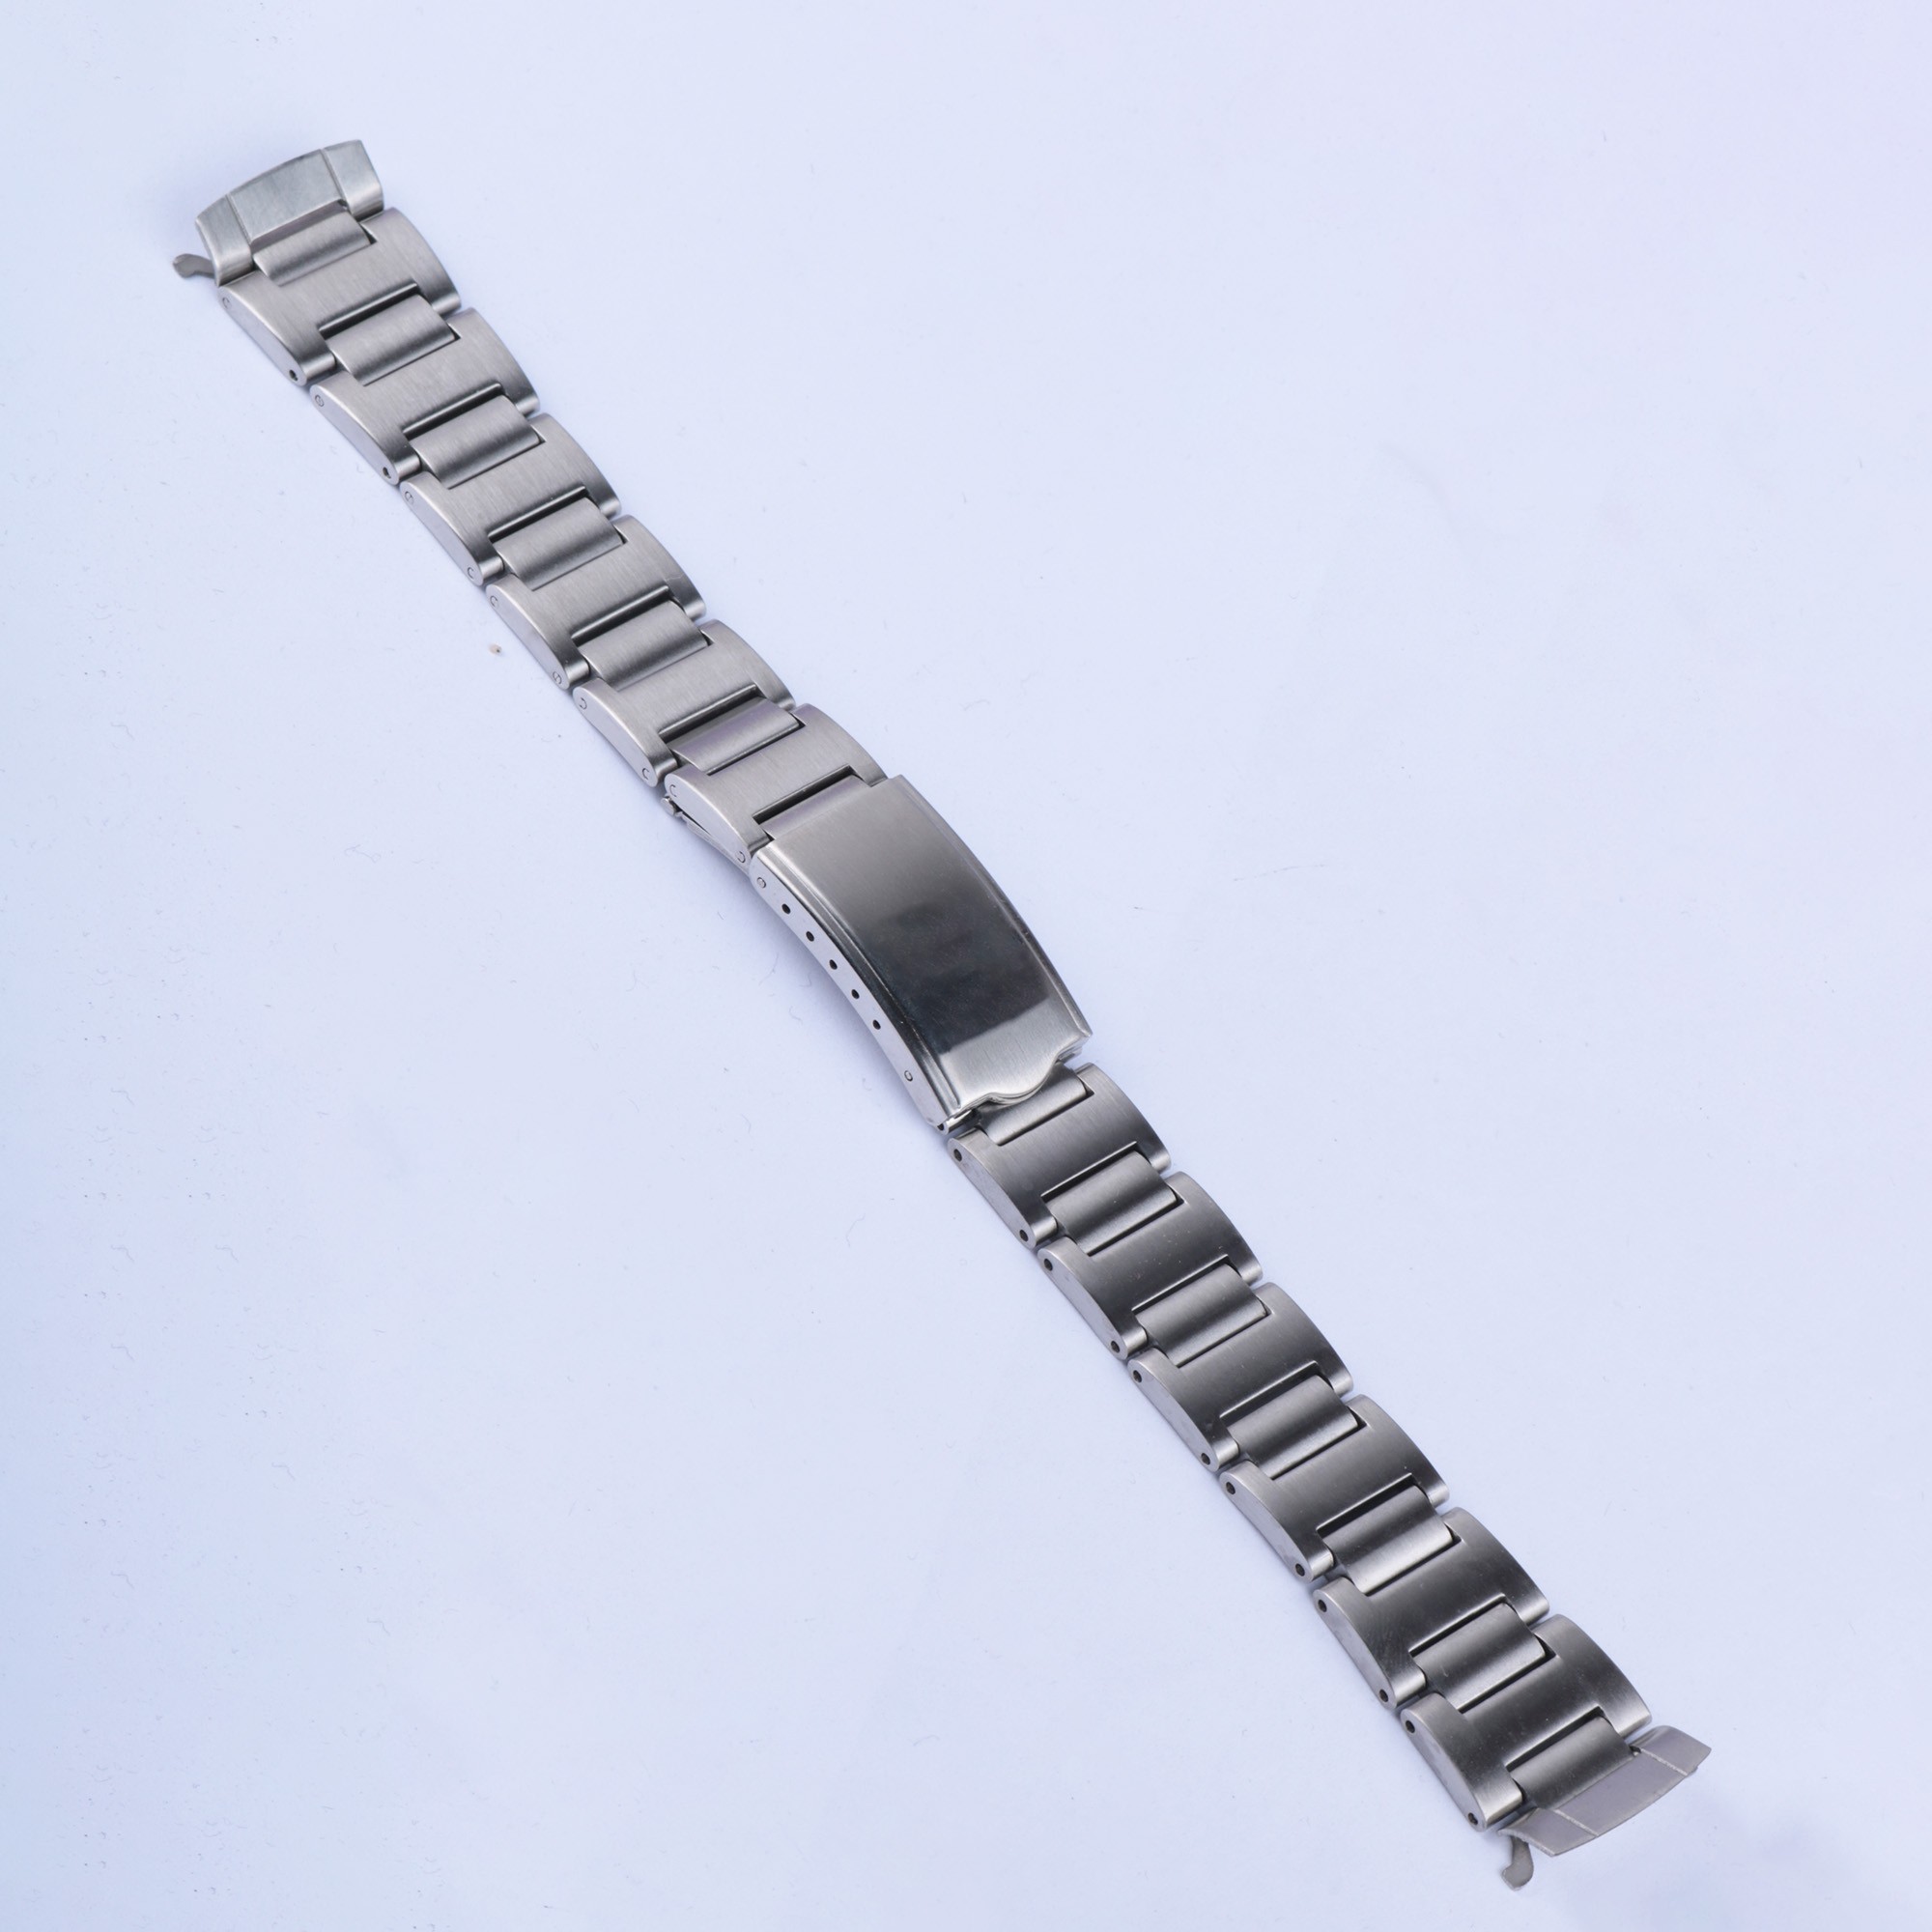 CARLYWET 19mm Vintage 316L Hollow Curved End Watch Band Strap Bracelet For Seiko Watch 6139-6002 6000 6001 6005 6032 Chrono